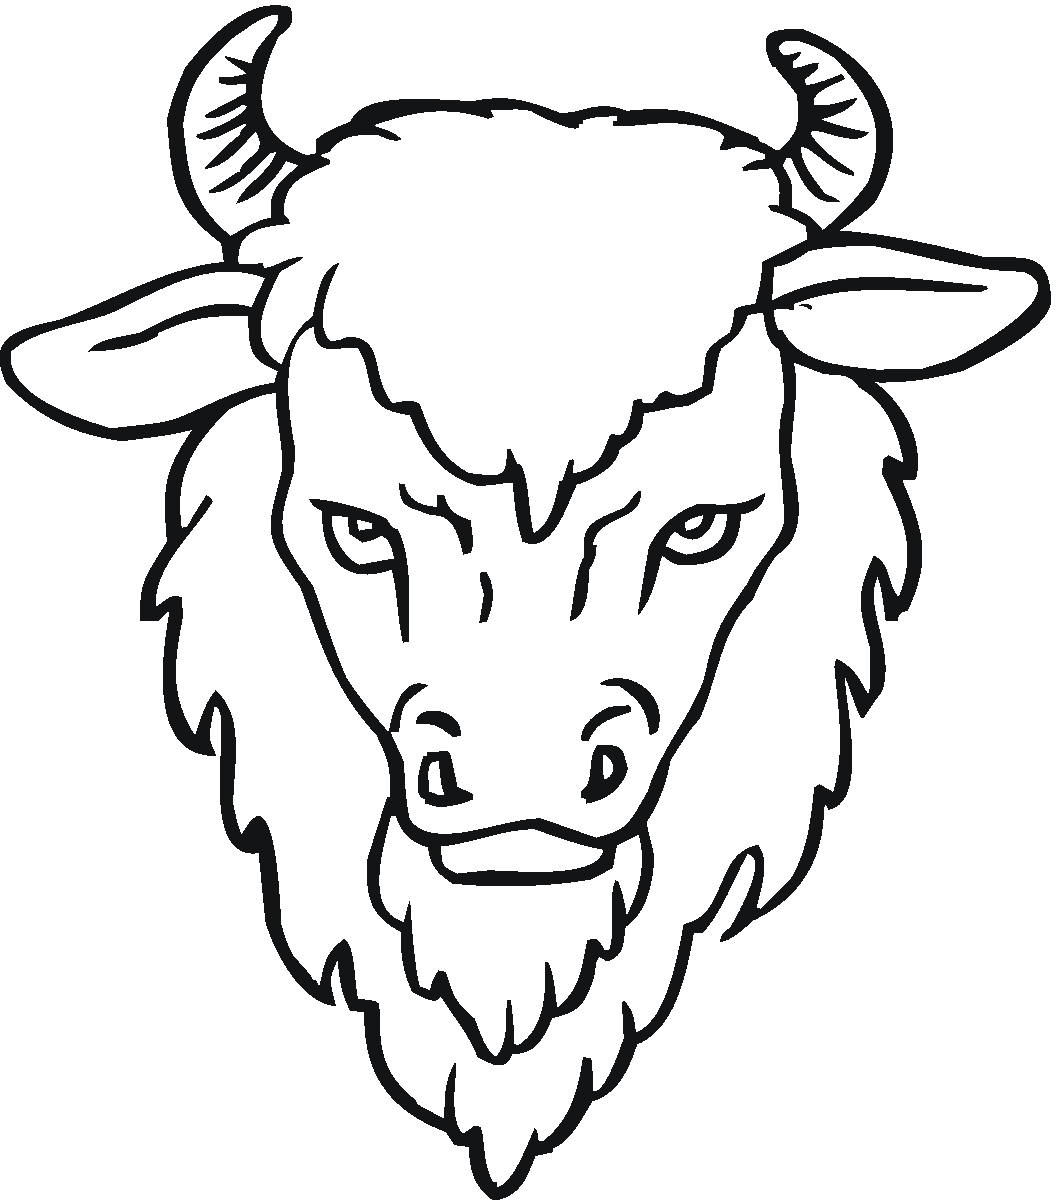 Free Buffalo Outline, Download Free Clip Art, Free Clip Art.